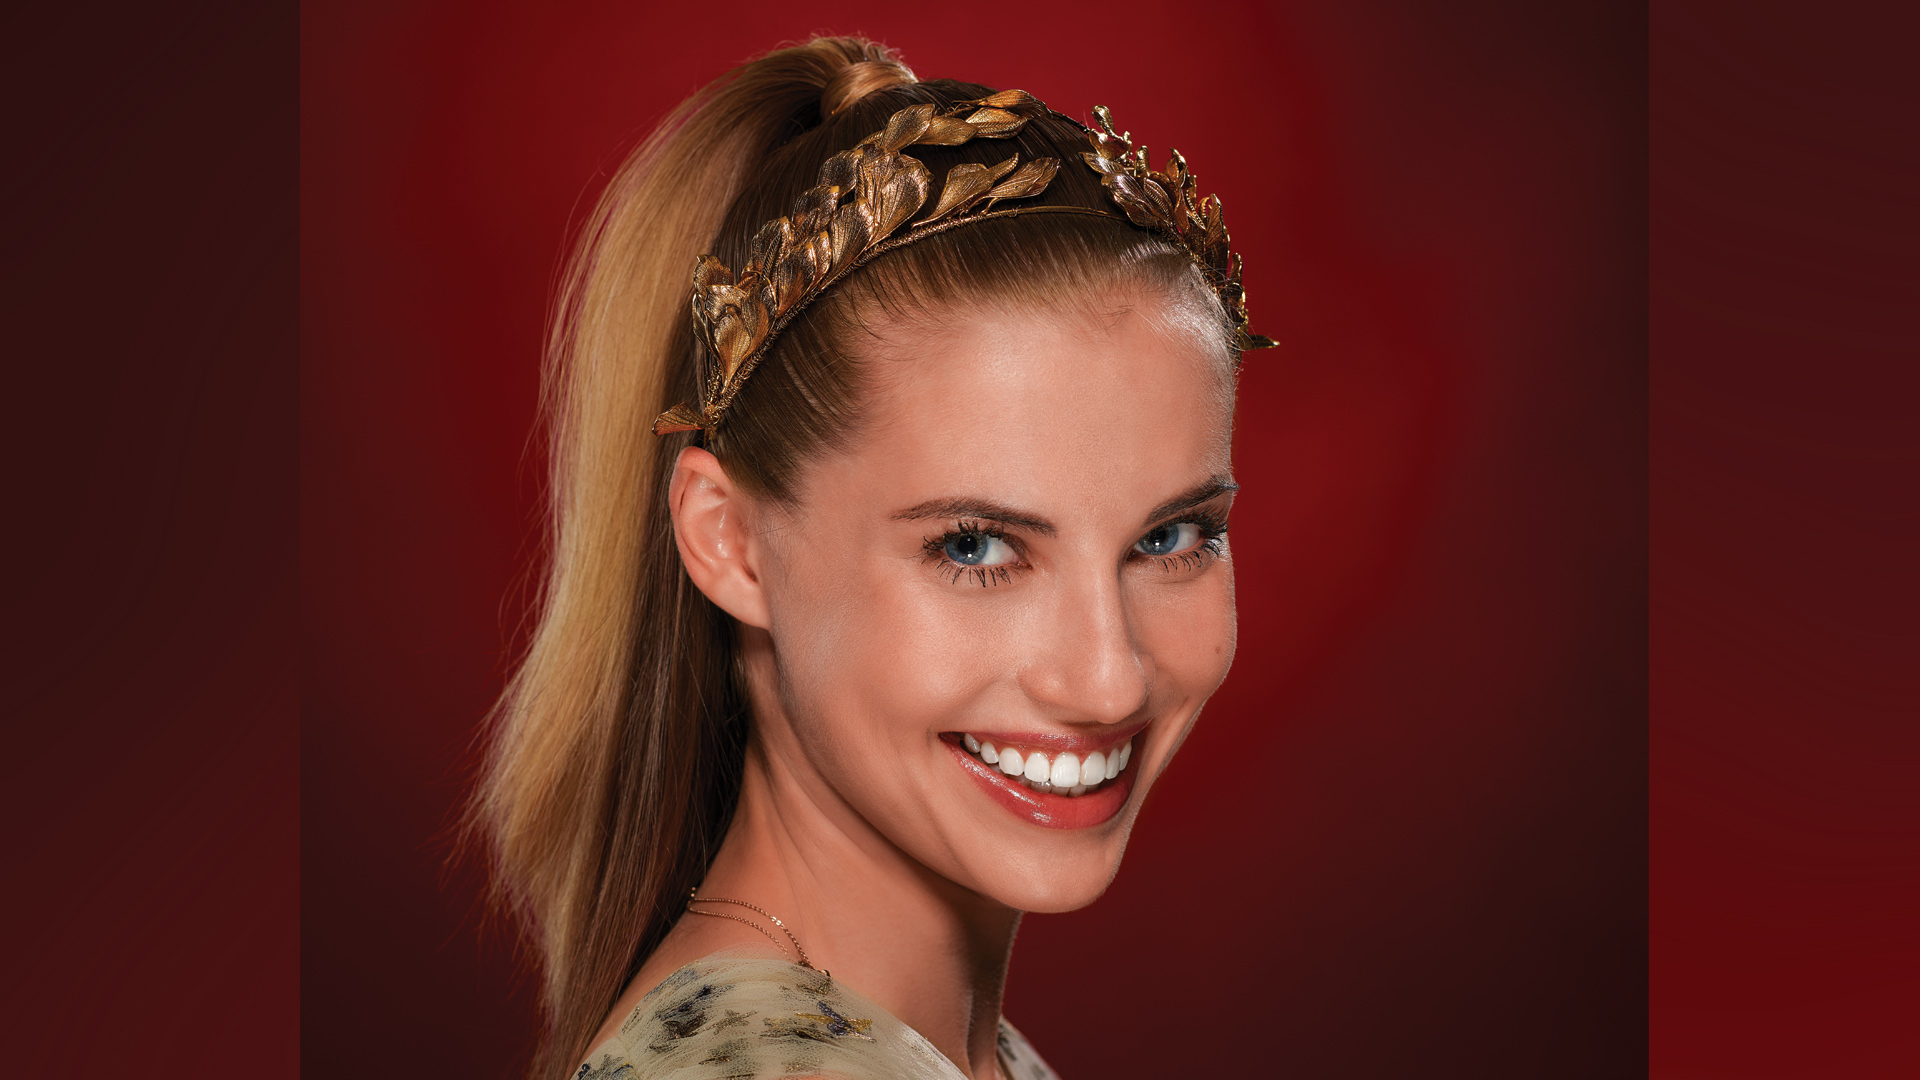 Wallis Currie-Wood adds festive sparkle and head bling to her hairstyle.